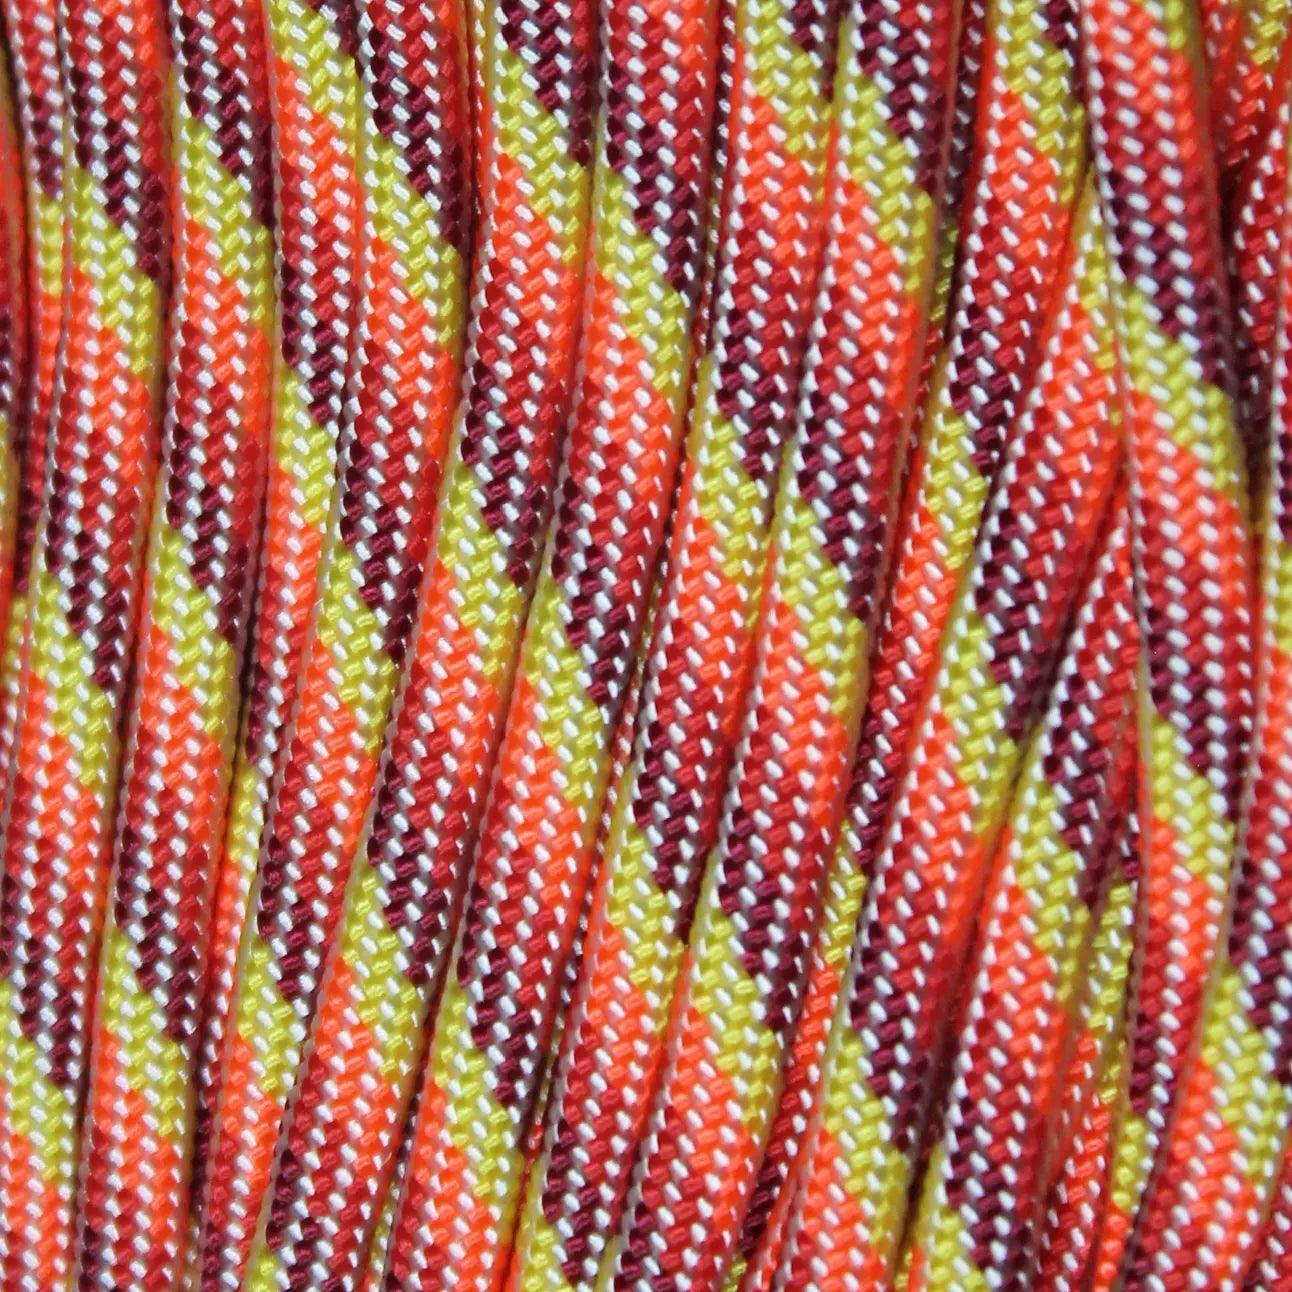 Sunset 550 Paracord Made in the USA (100 FT.)  163- nylon/nylon paracord